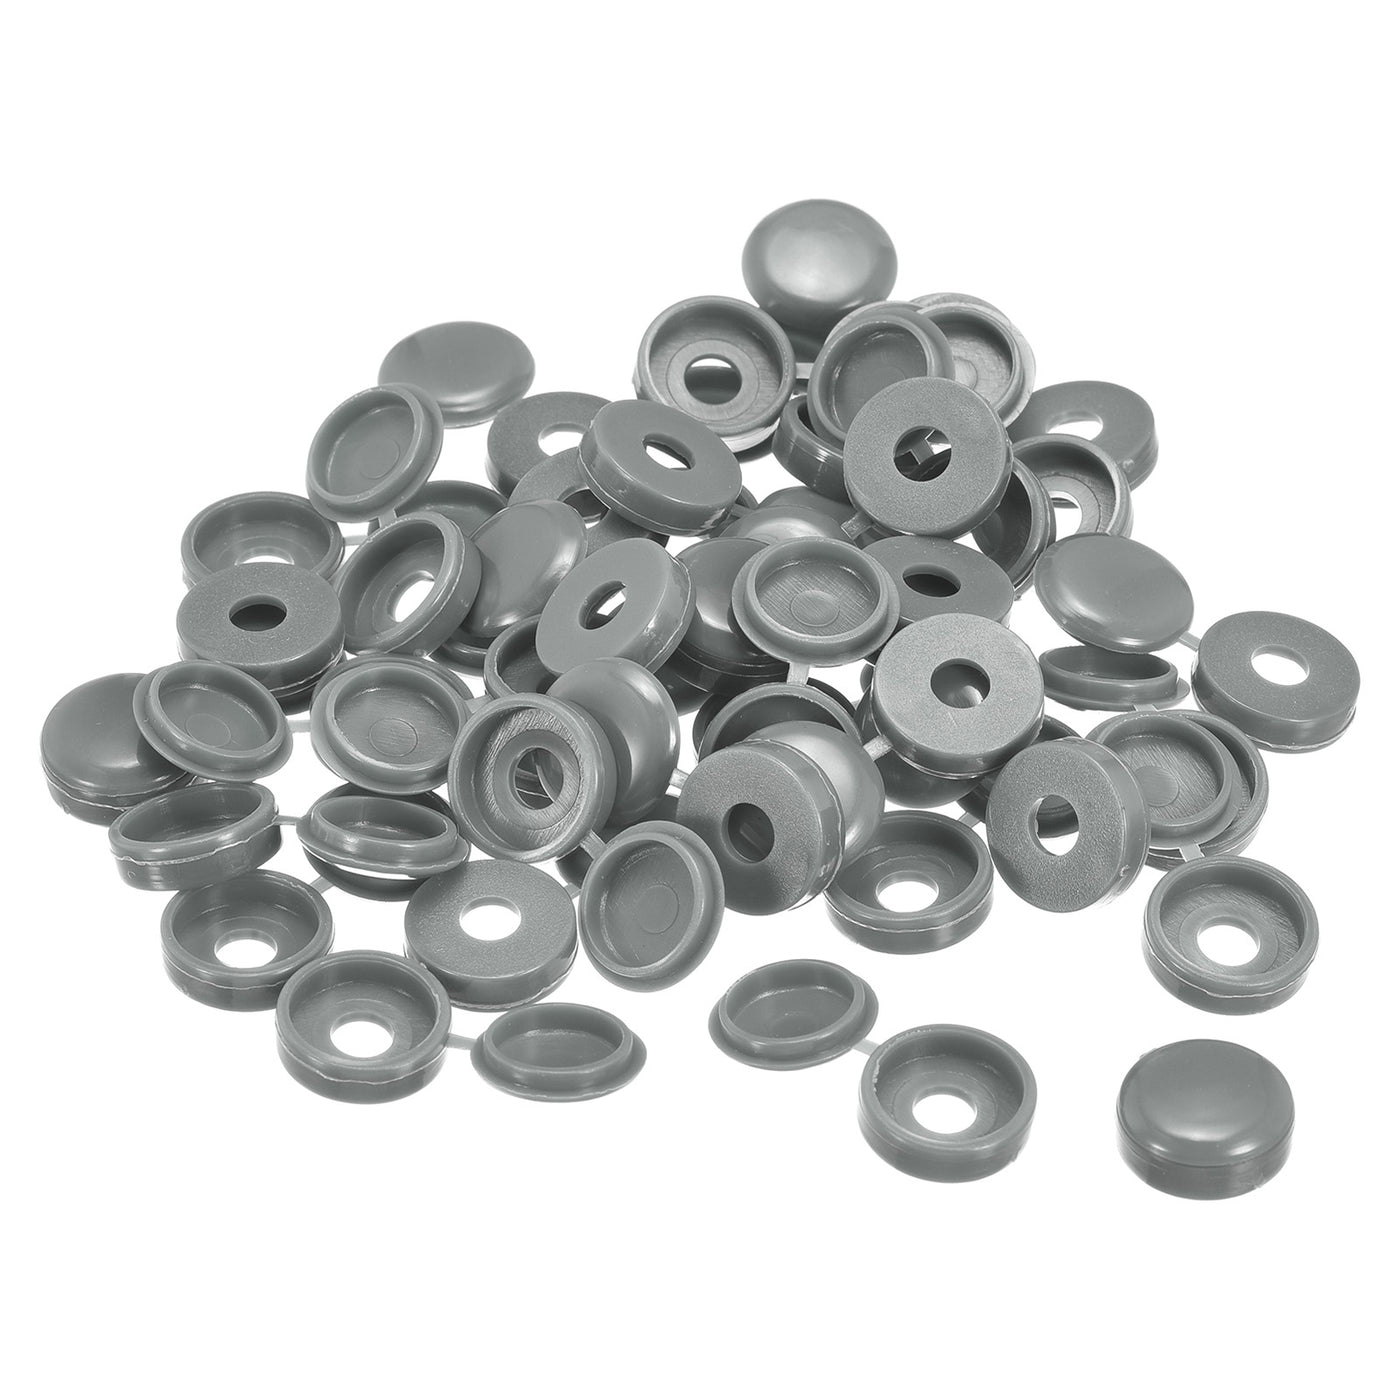 uxcell Uxcell 200Pcs 6mm Hinged Screw Cover Caps Plastic Fold Screw Snap Covers, Gray